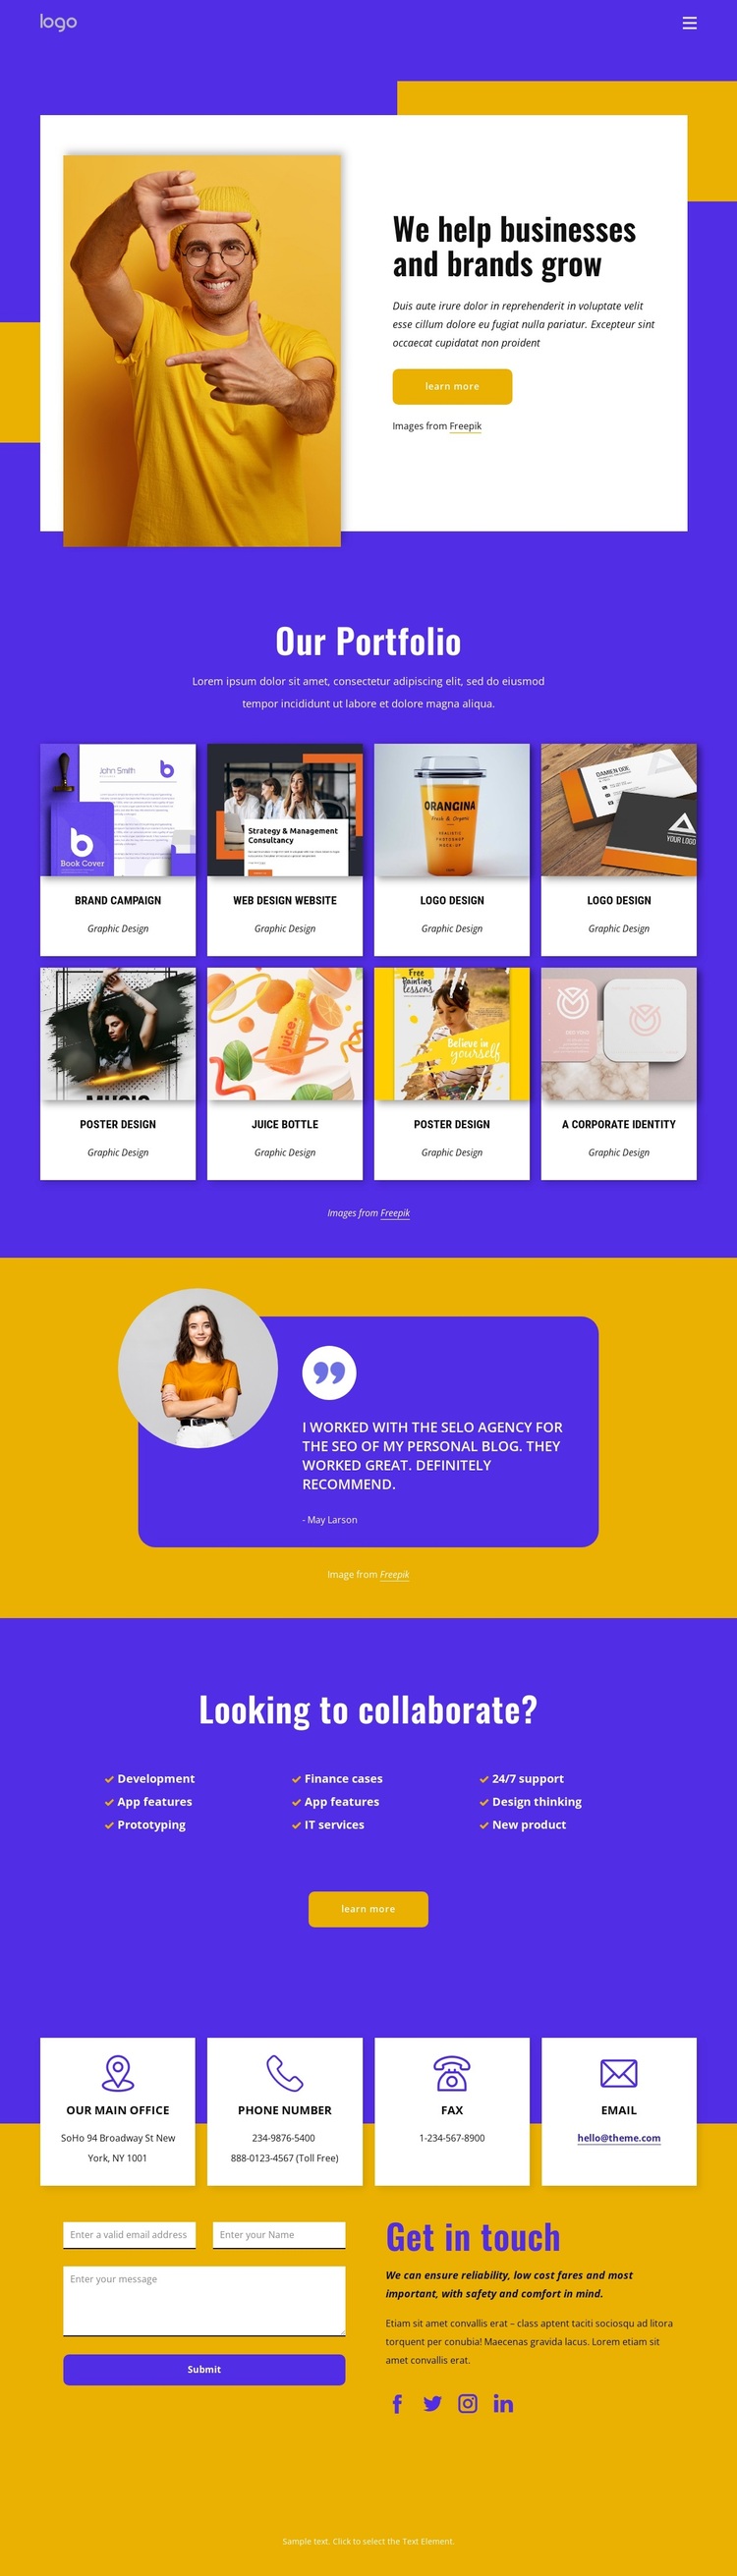 We design digital products and brands Template